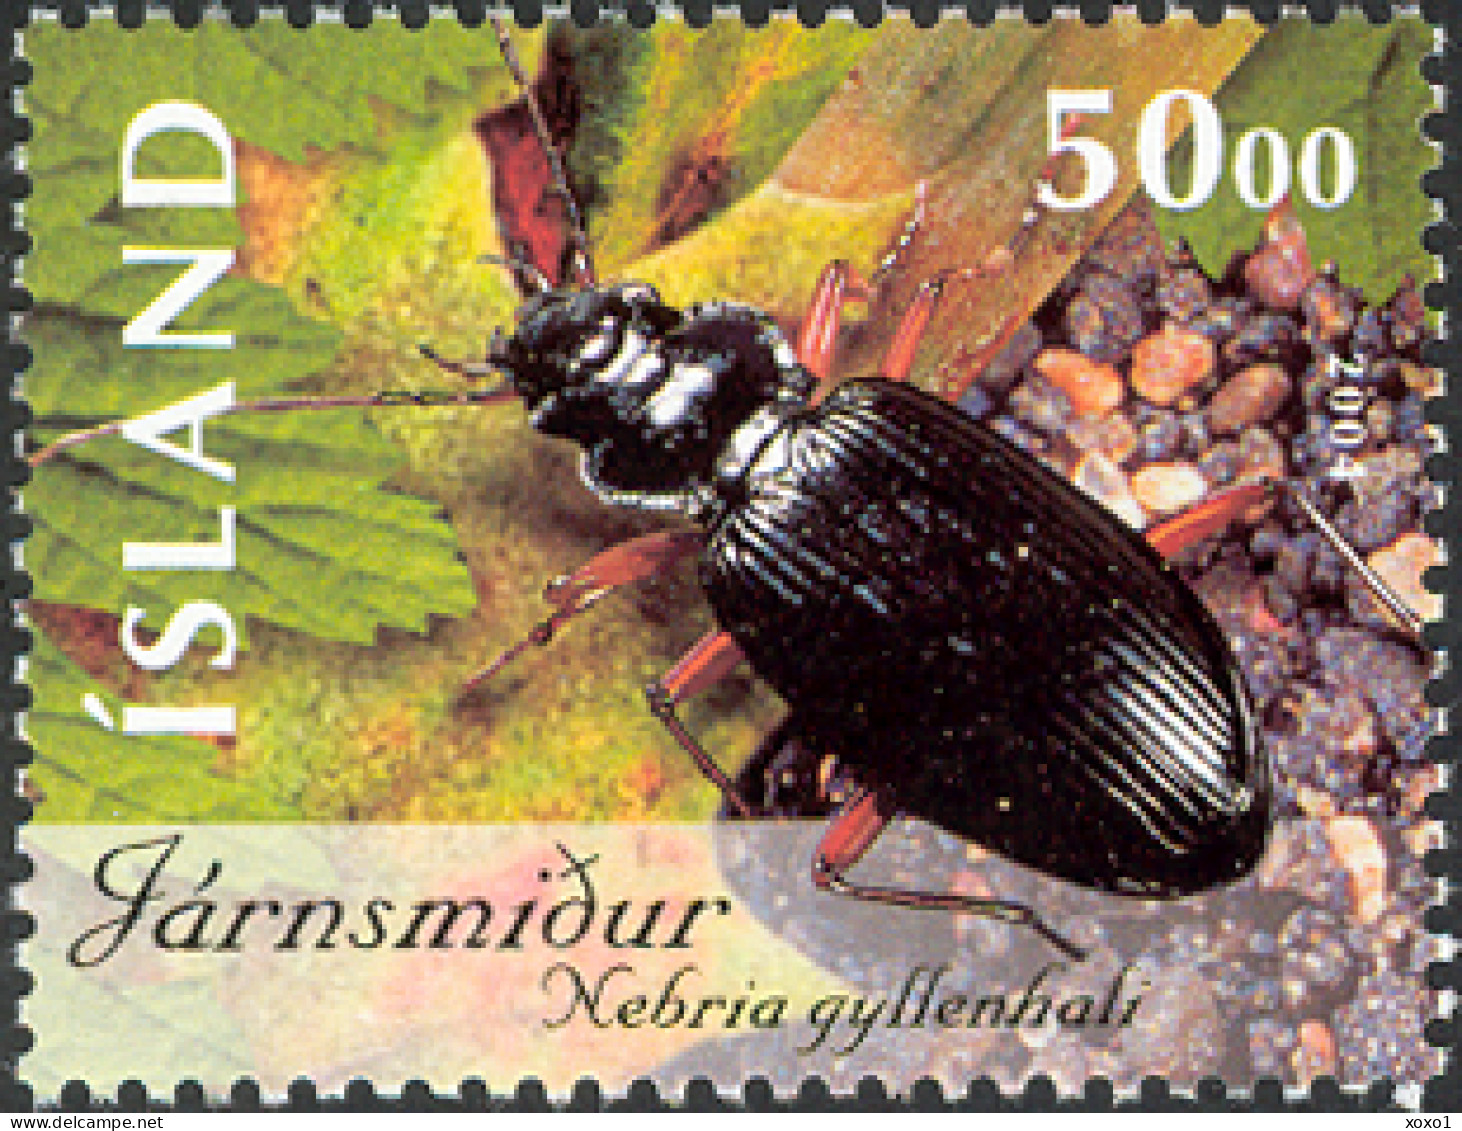 Iceland 2004 MiNr. 1075 - 1076 Island Insects And Spiders  # 1     2v  MNH** 3.50 € - Kevers